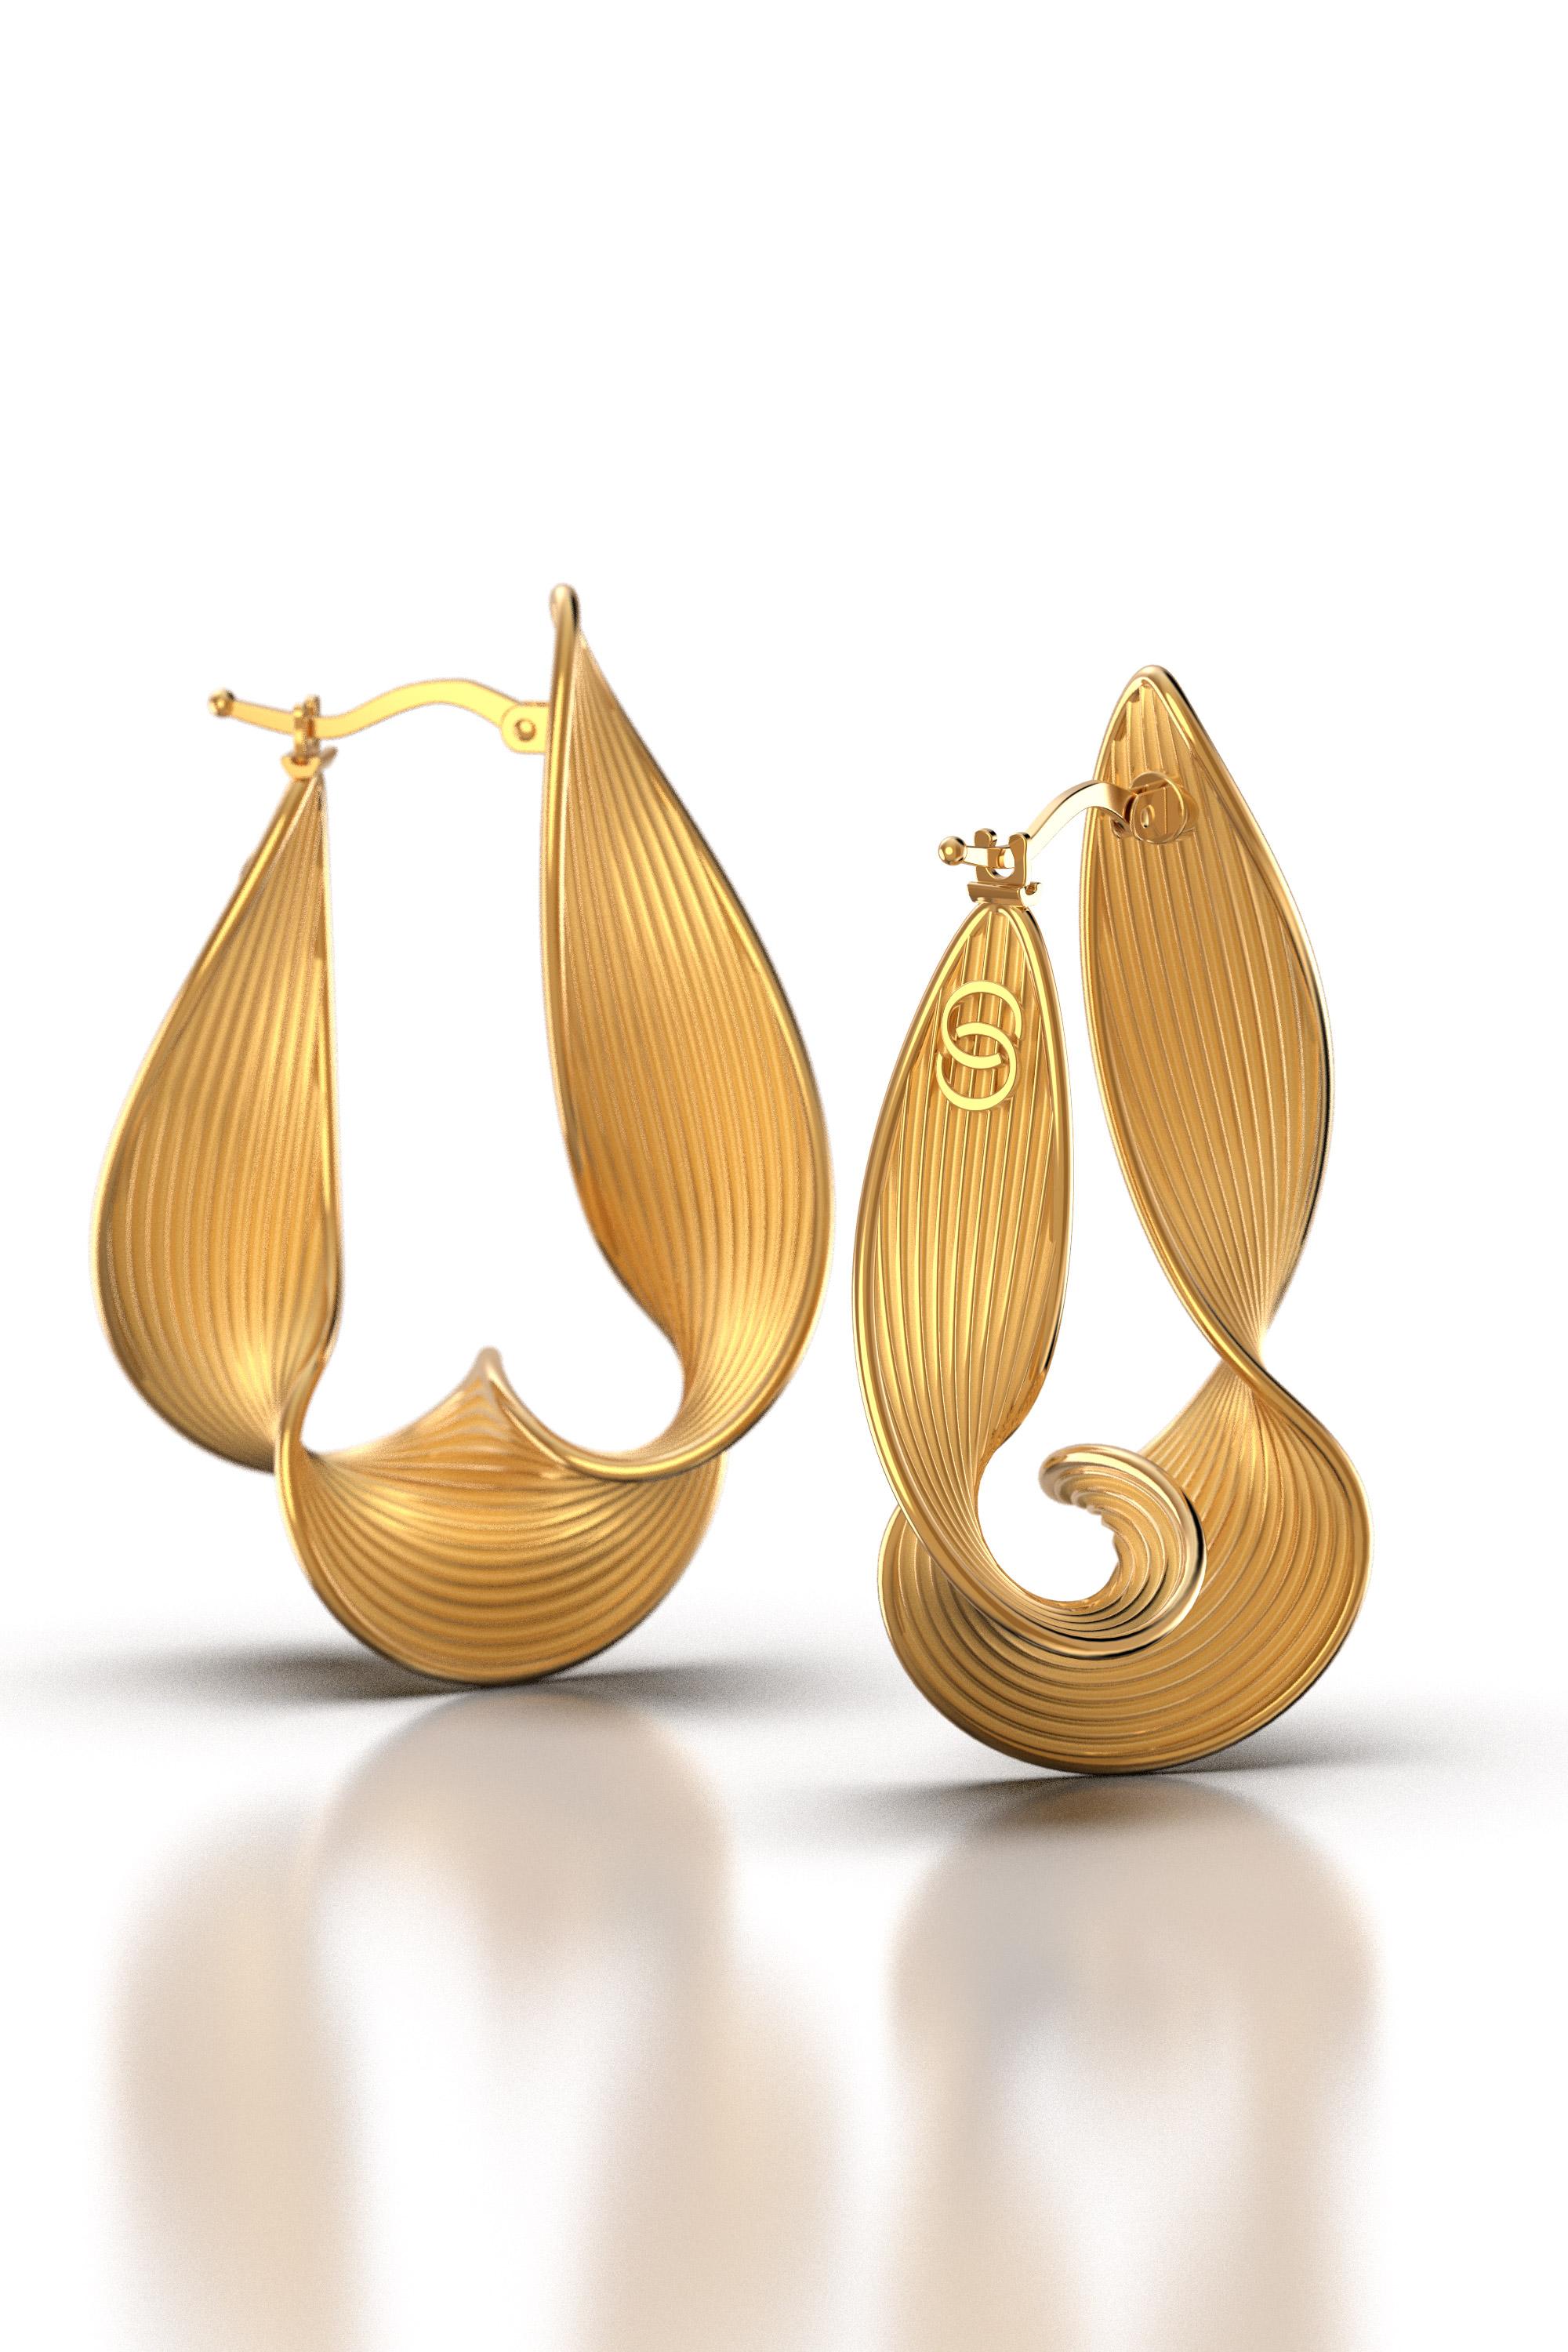 Discover our exclusive made-to-order Statement Twisted Hoop Earrings in 18k gold, meticulously handcrafted in Italy by Oltremare Gioielli. These unique, long twisted hoops feature a captivating ribbed surface and polished edges, embodying a perfect